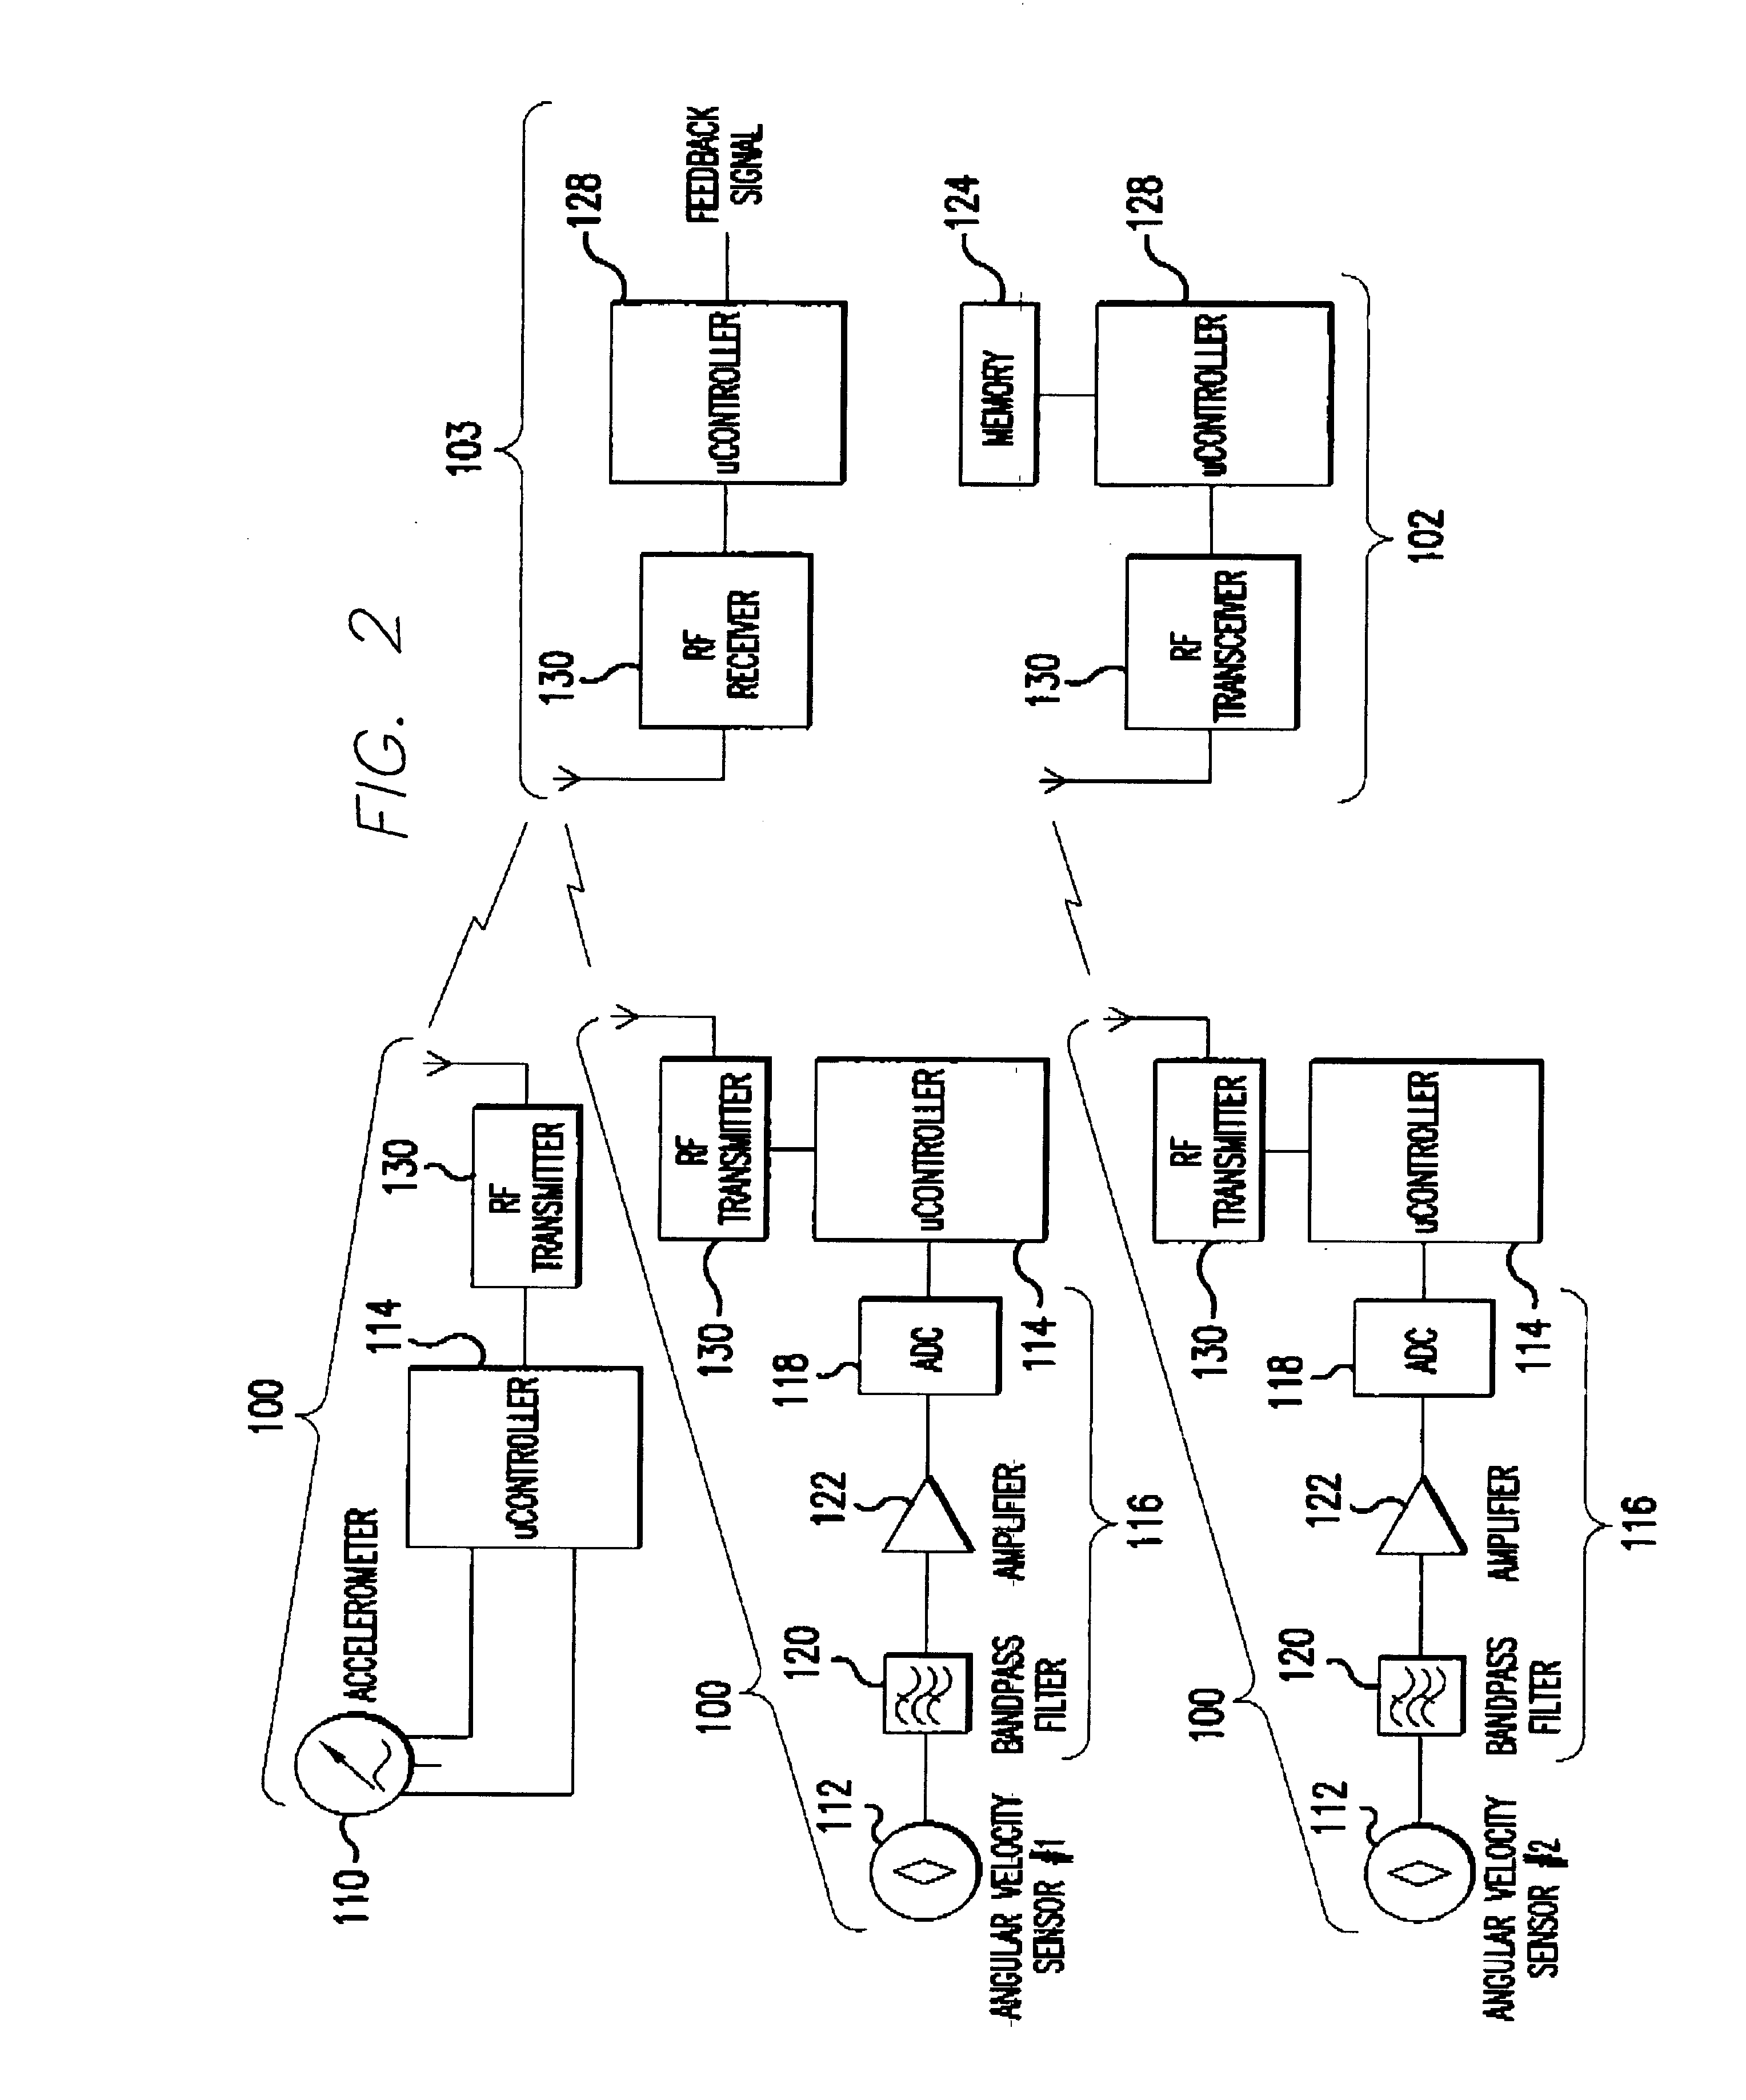 Method and apparatus for learning specific body motion